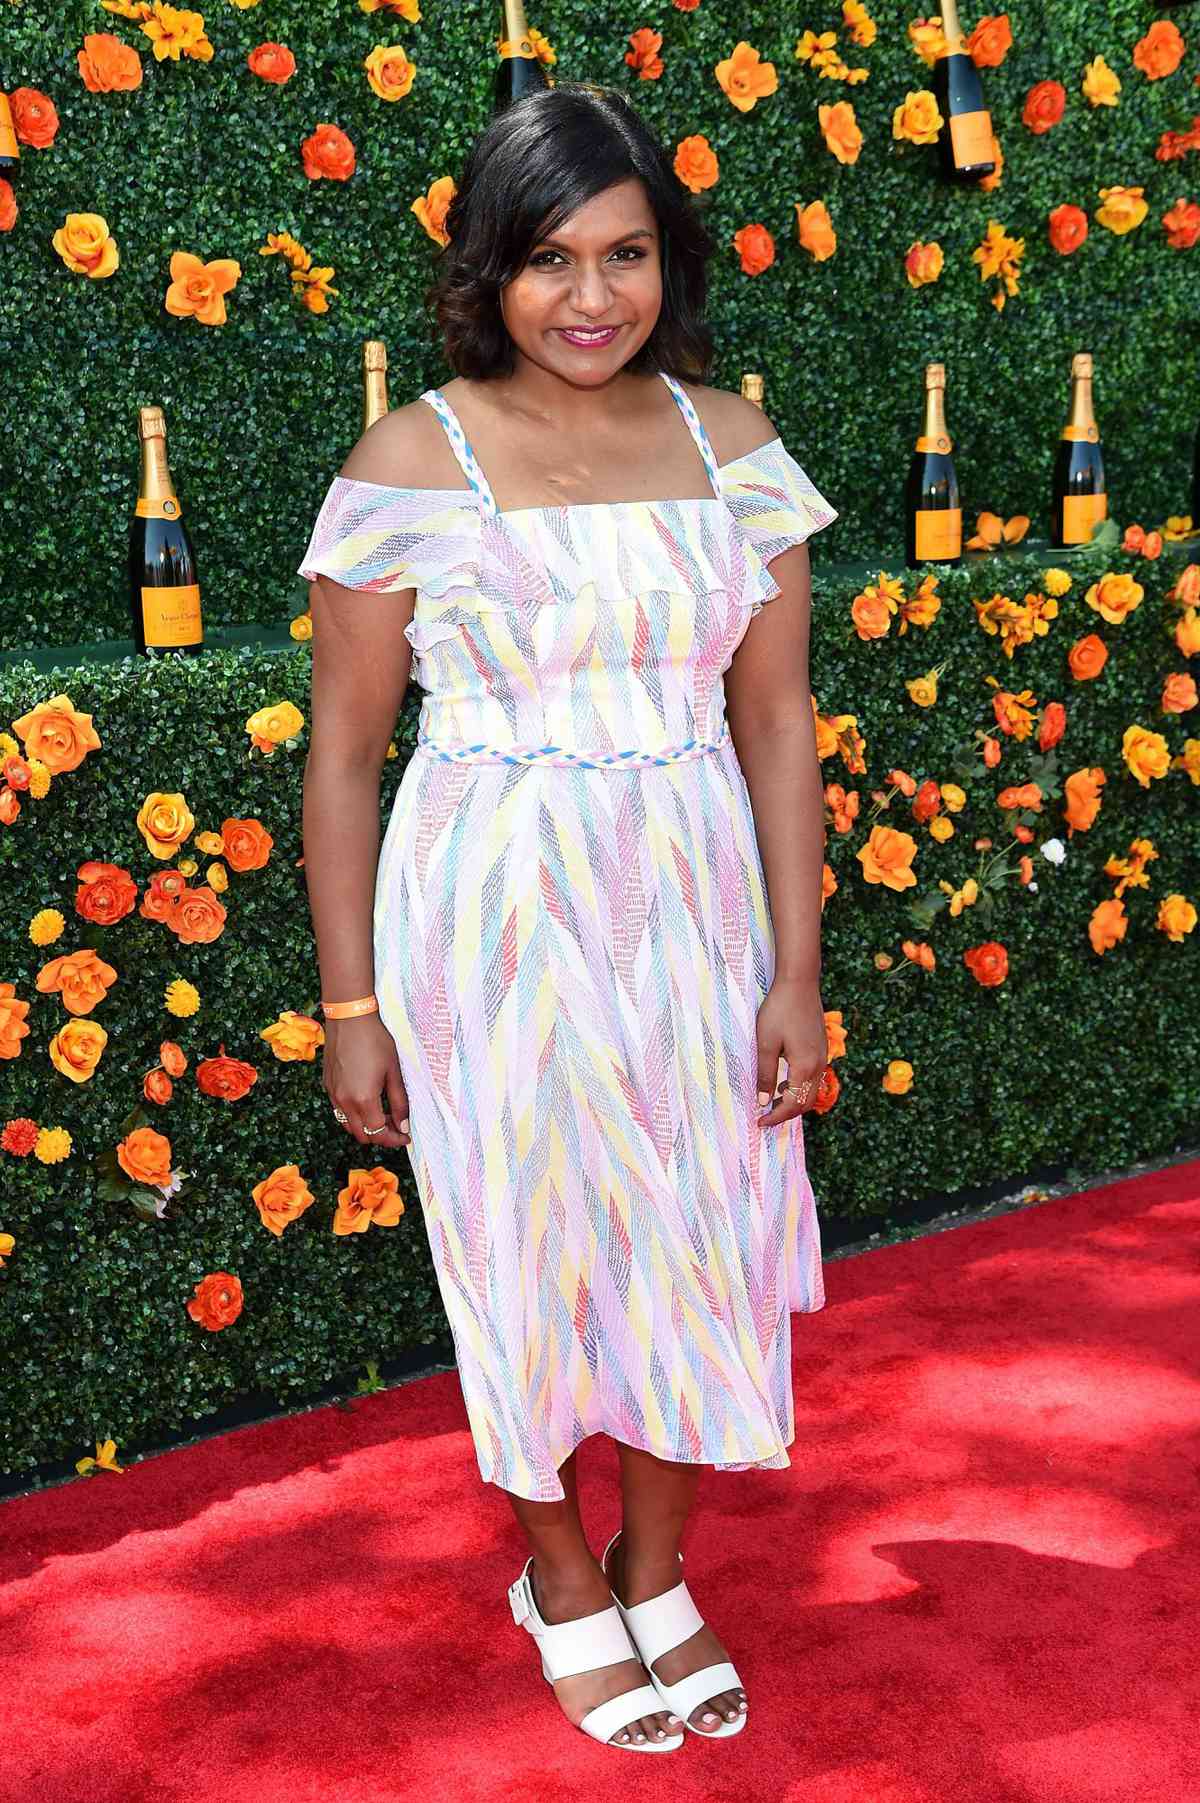 Mindy Kaling at the Veuve Clicquot Polo Classic